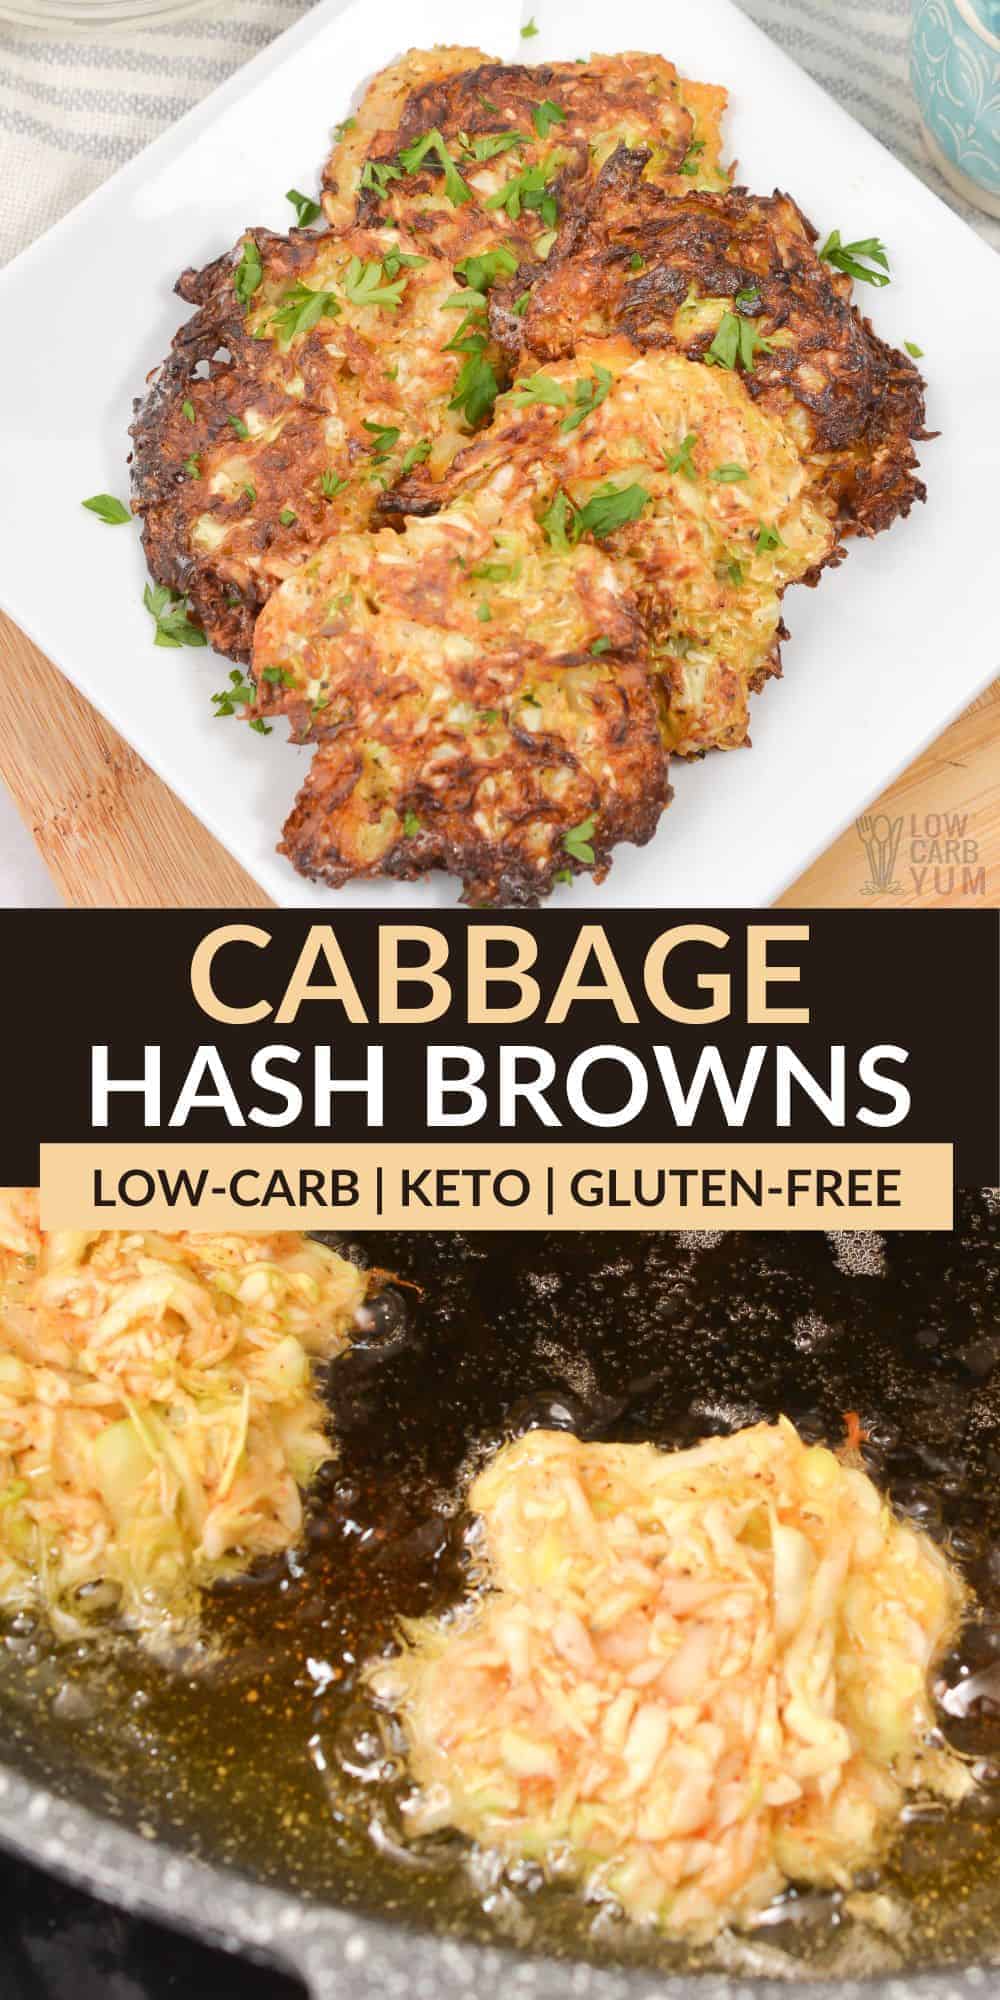 cabbage hash browns pinterest image.